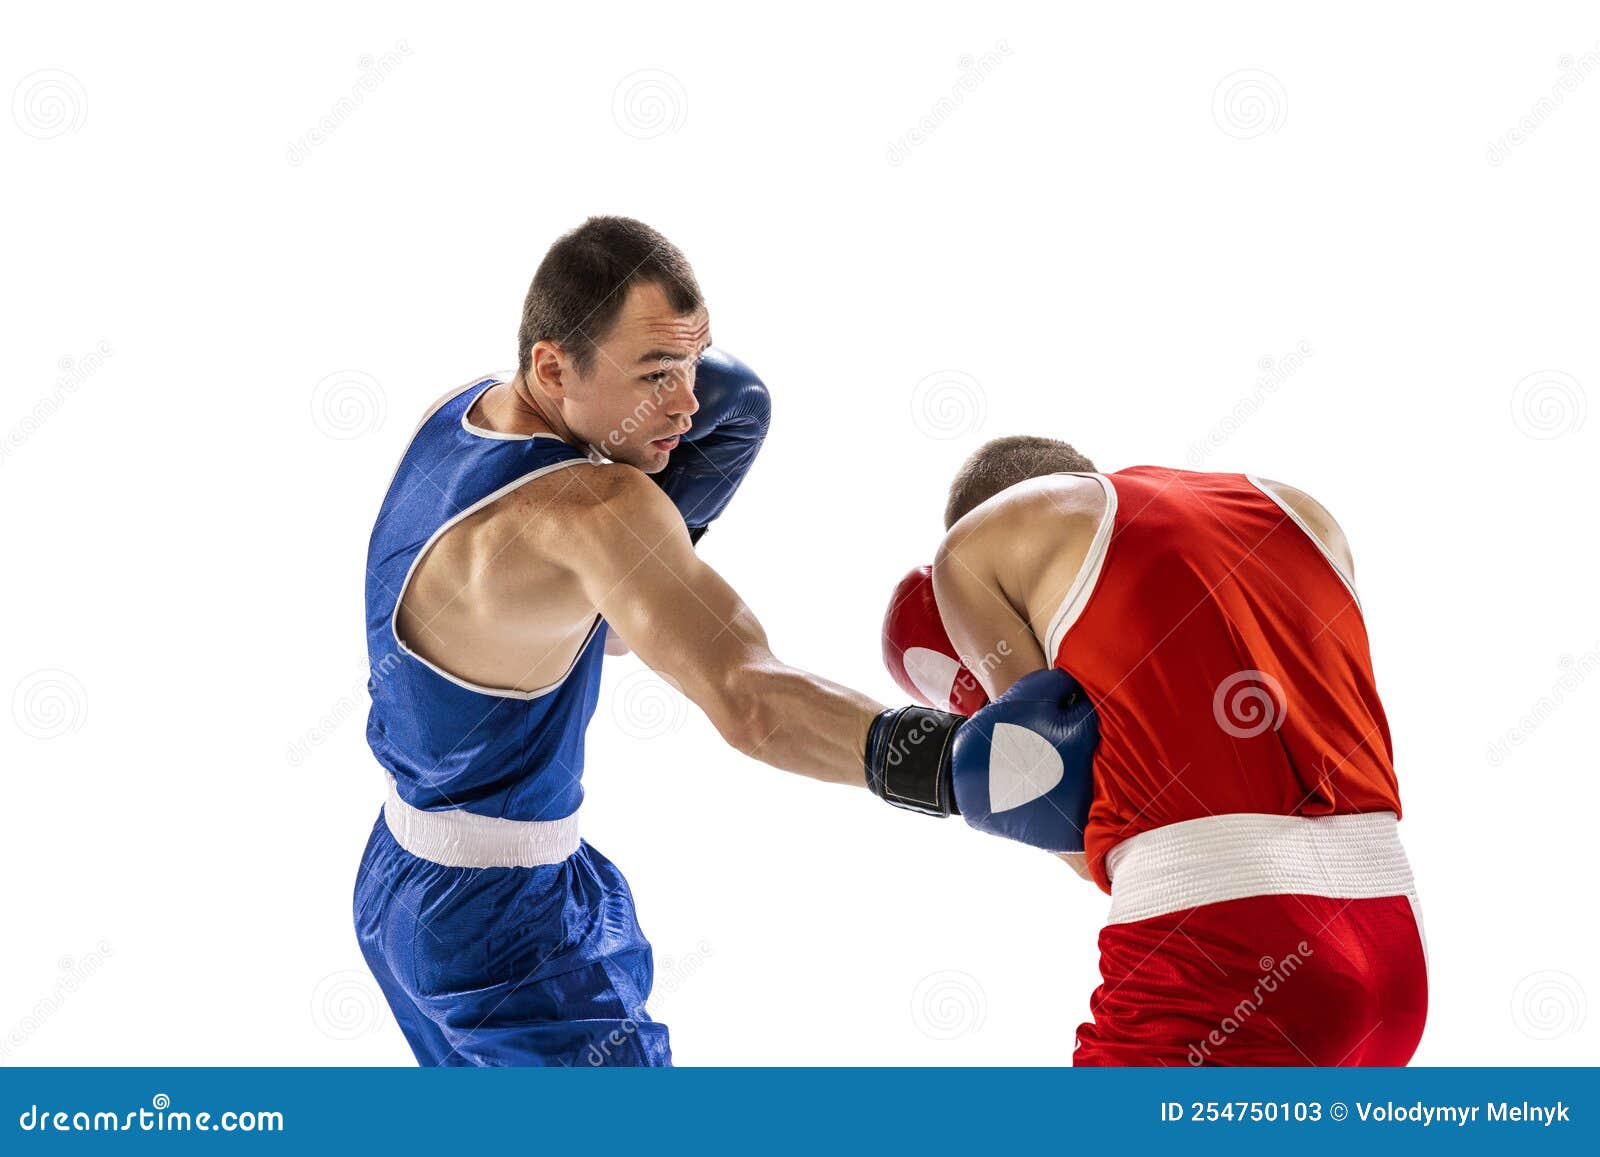 Sportive Men, Two Professional Boxer in Sports Uniform Practicing